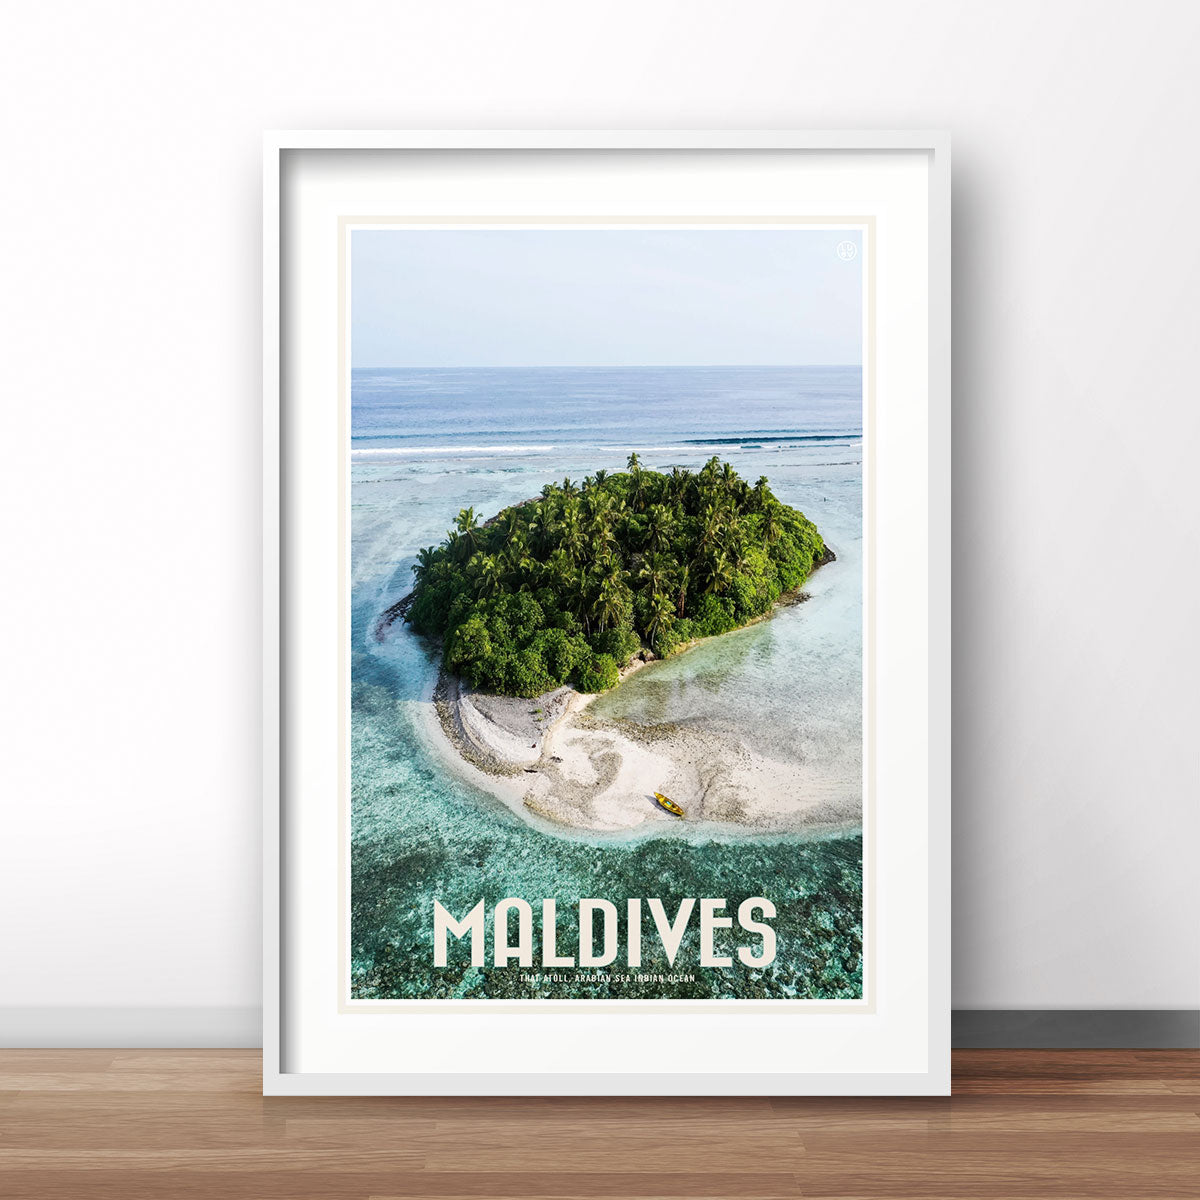 Maldives travel vintage style poster by places we luv